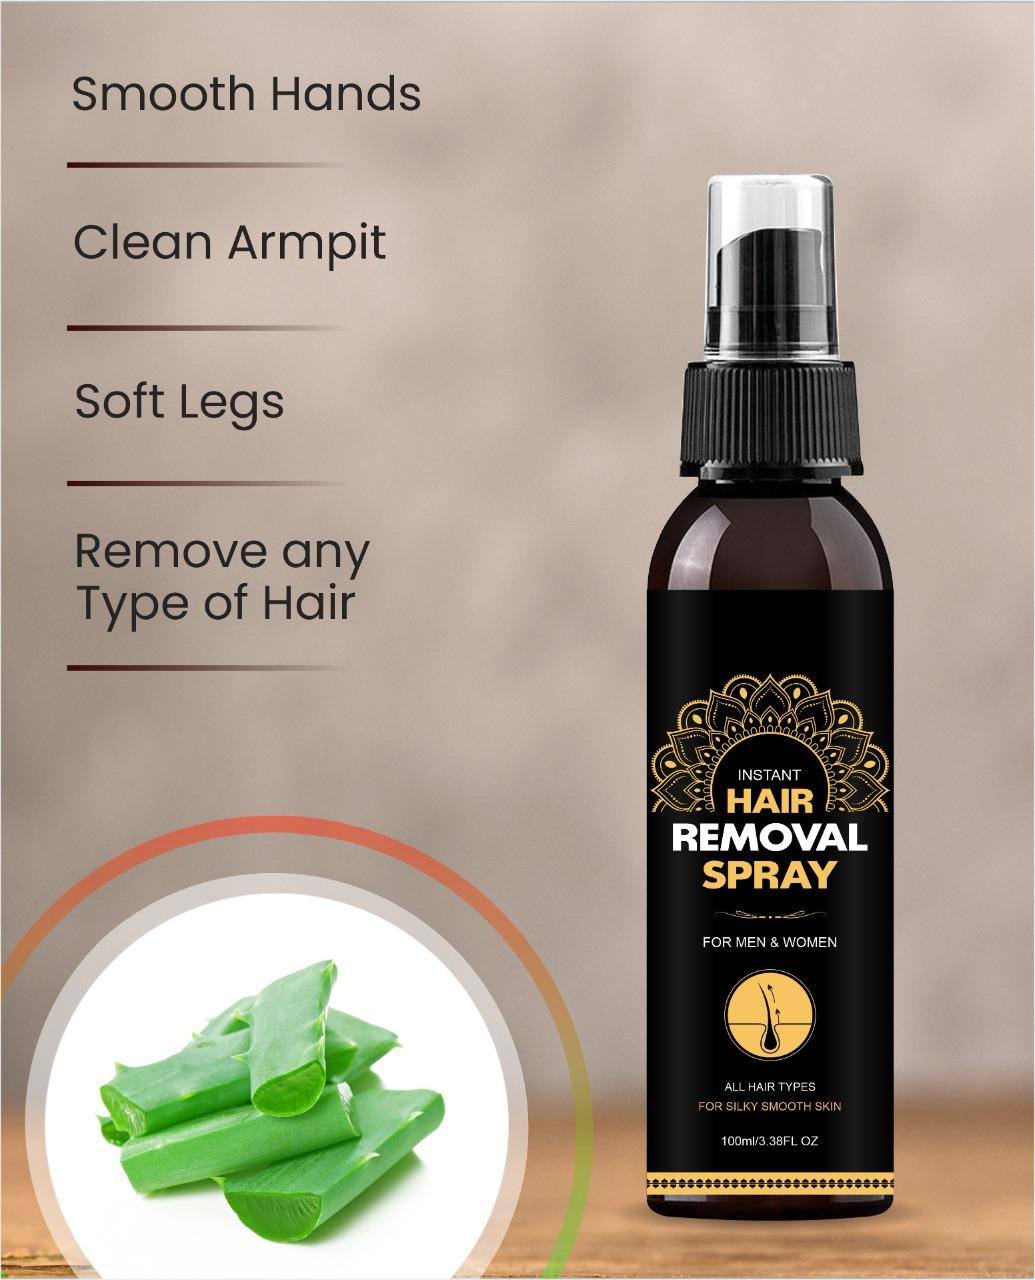 Ayurjeet Hair Removal Spray for Men and Women 100 ml - Painless Removal of Unwanted Body Hair - Smooth Hands - Soft Legs - Clean Armpit Spray��(100 ml)